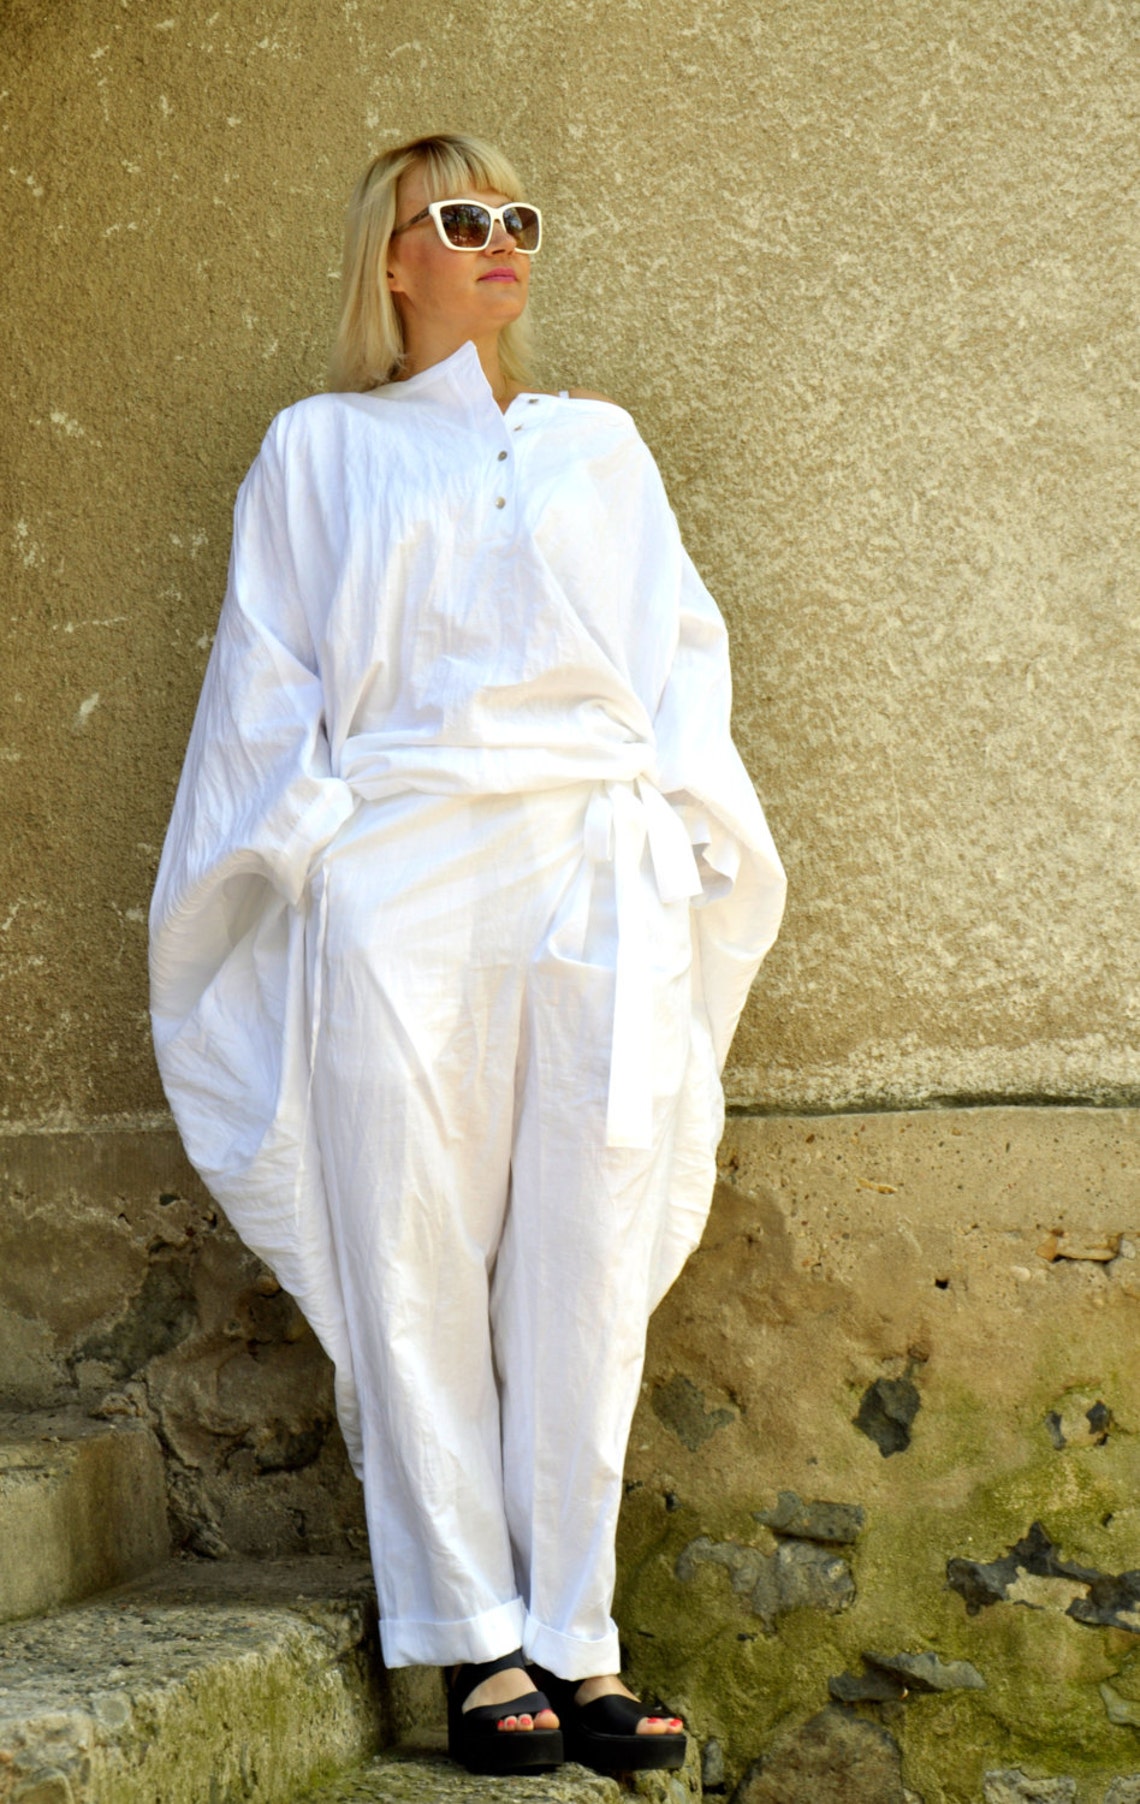 Linen Tunic and Pants Set White Linen Outfit for Women Linen - Etsy